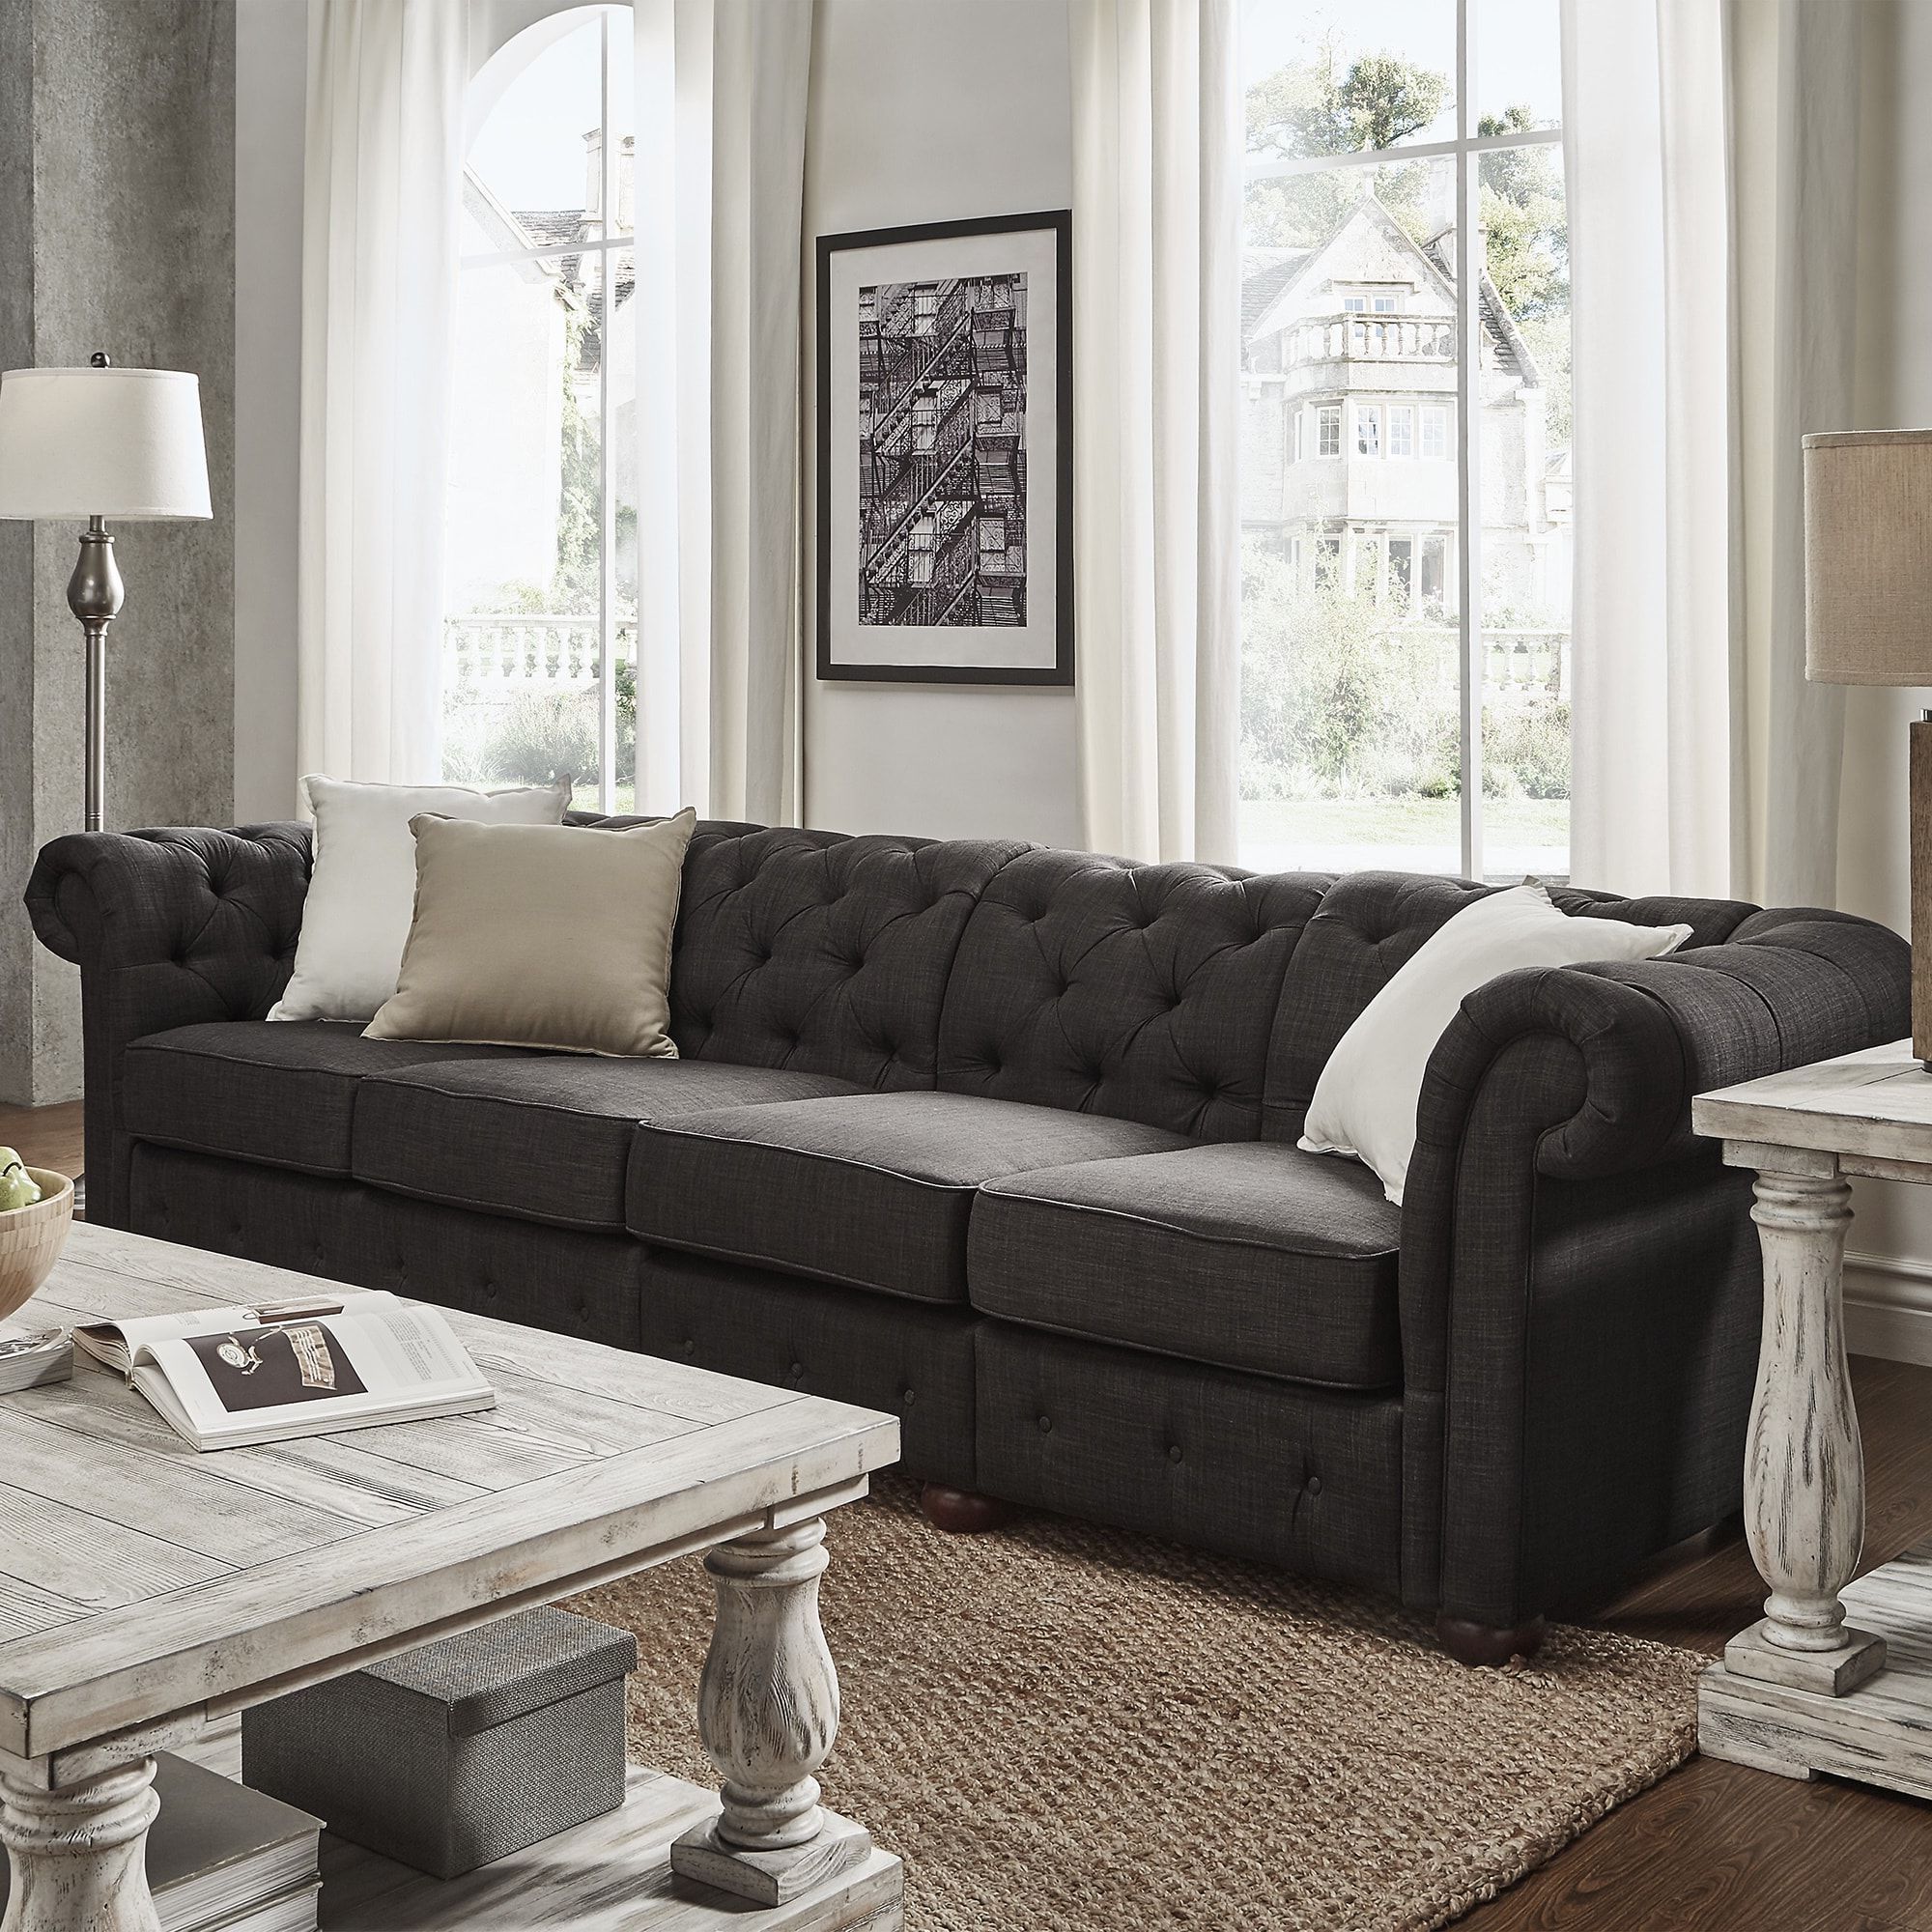 Well Liked Knightsbridge Dark Grey Extra Long Tufted Chesterfield Sofainspire For Sofas In Dark Grey (View 2 of 15)